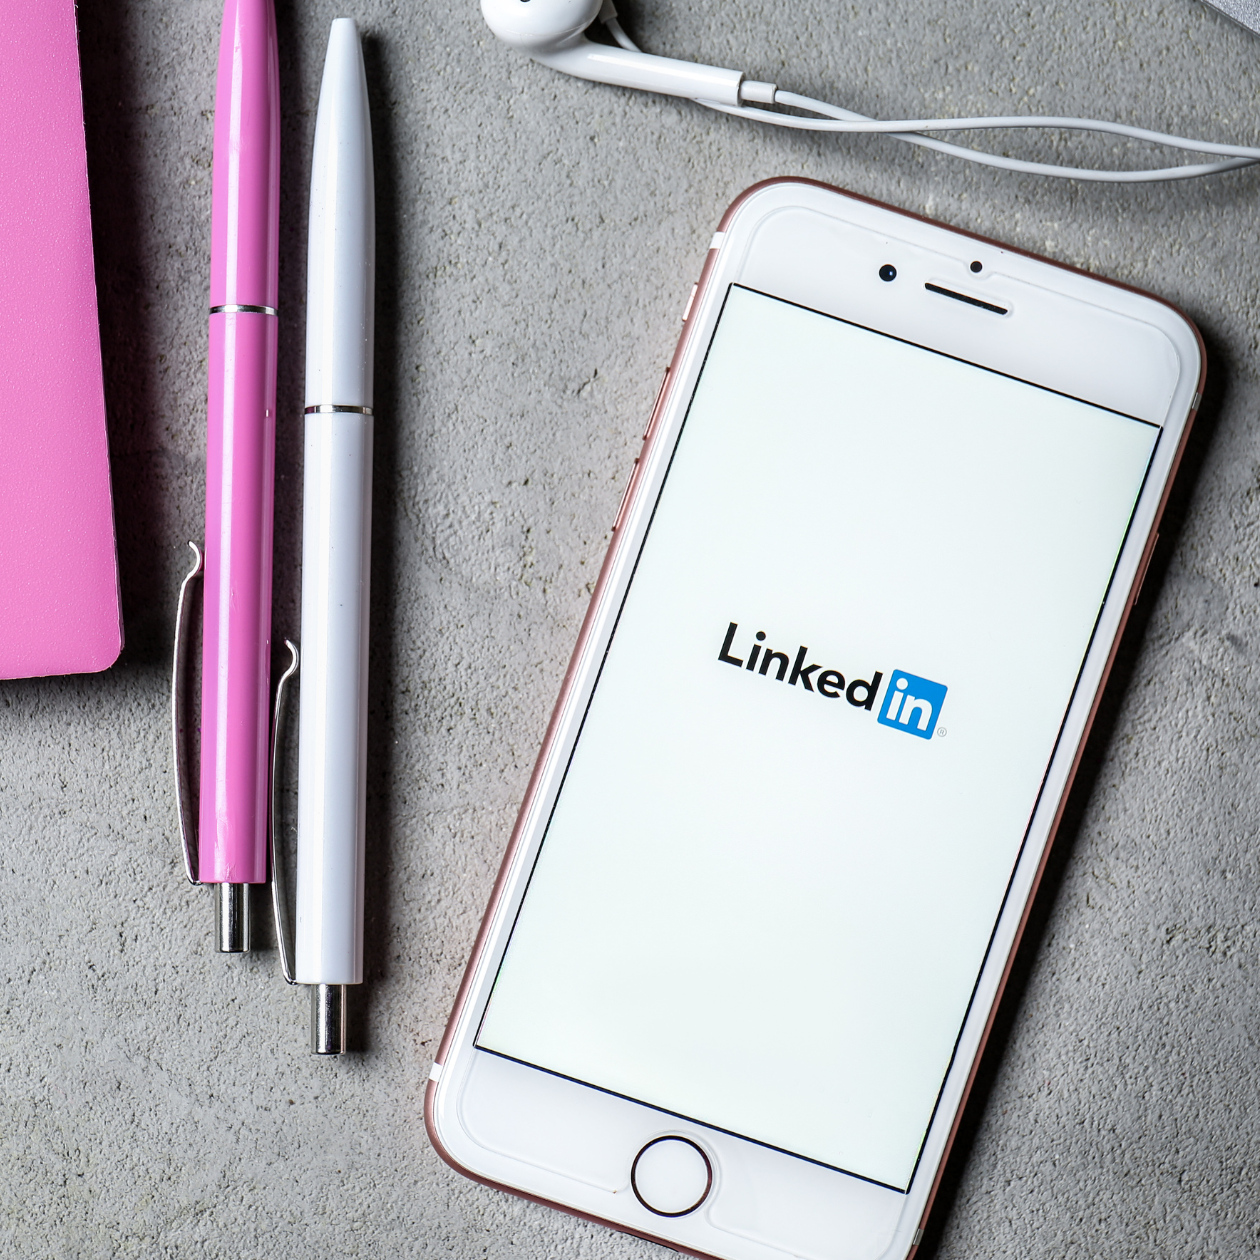 Elevating Your LinkedIn Profile While Being Your Authentic Self: A Guide for Intentionally Revamping your LinkedIn Presence